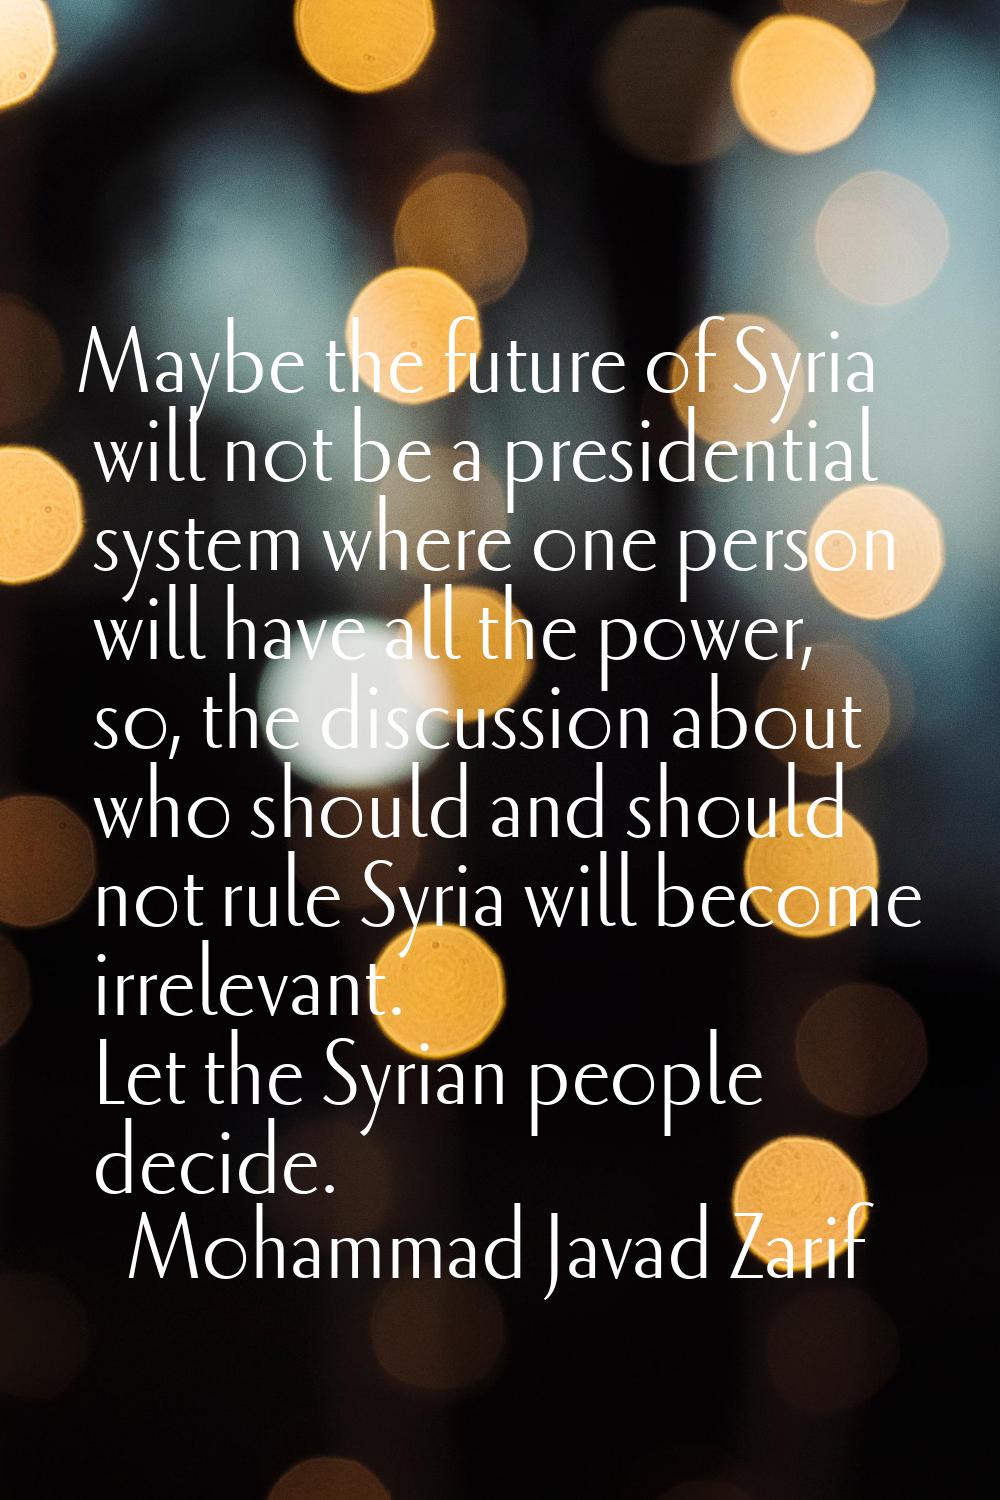 Maybe the future of Syria will not be a presidential system where one person will have all the powe